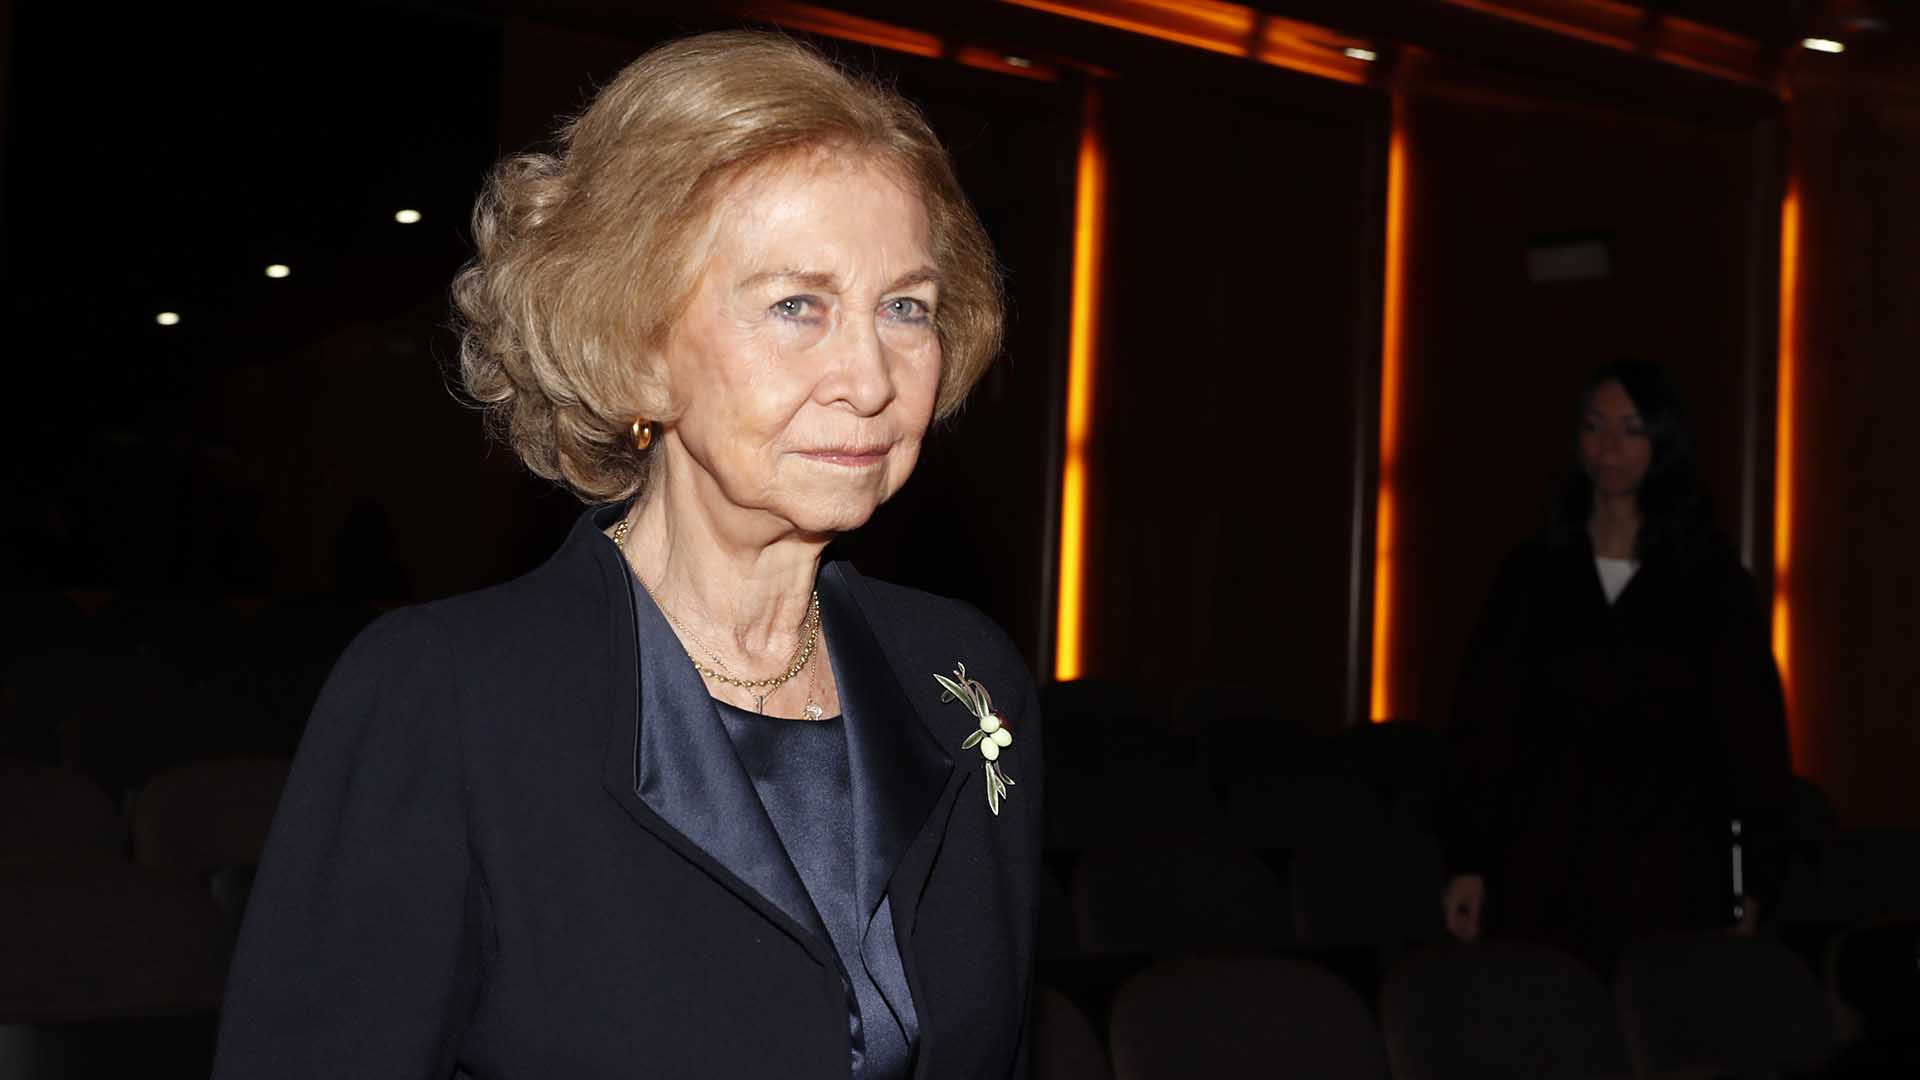 Queen Sofia during the meeting of the Board of the School of Music "Reina Sofia" in Madrid on Tuesday, 11 February 2020.